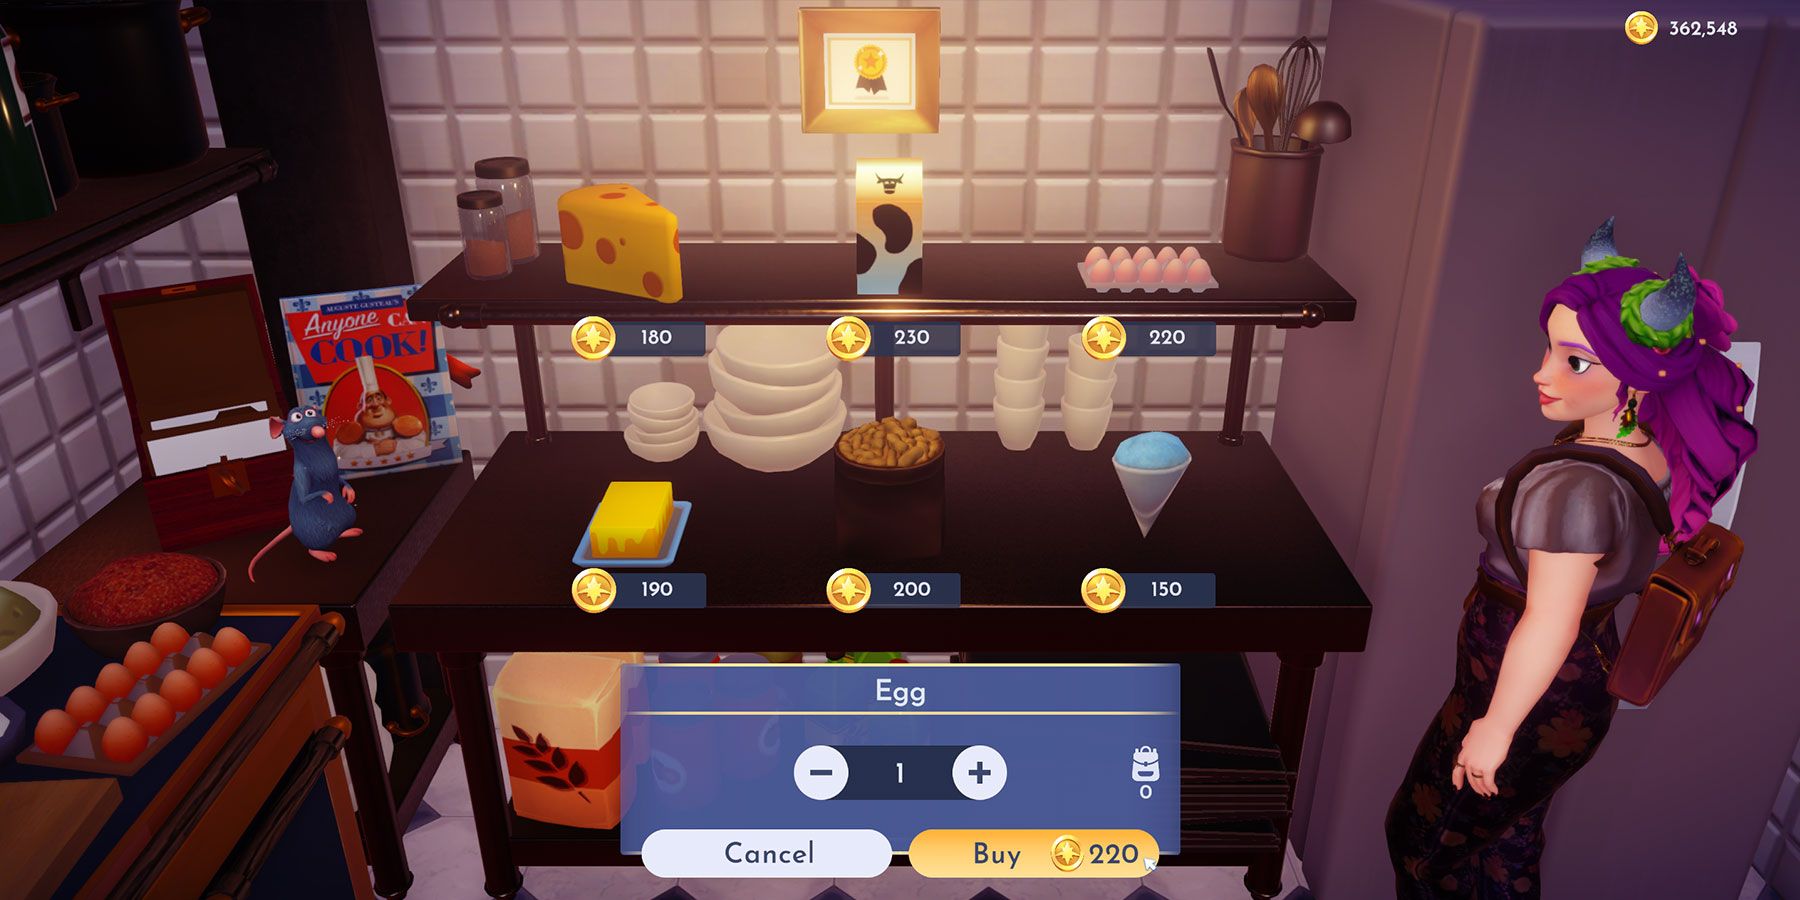 Buying eggs at Remy's Pantry store in Disney Dreamlight Valley